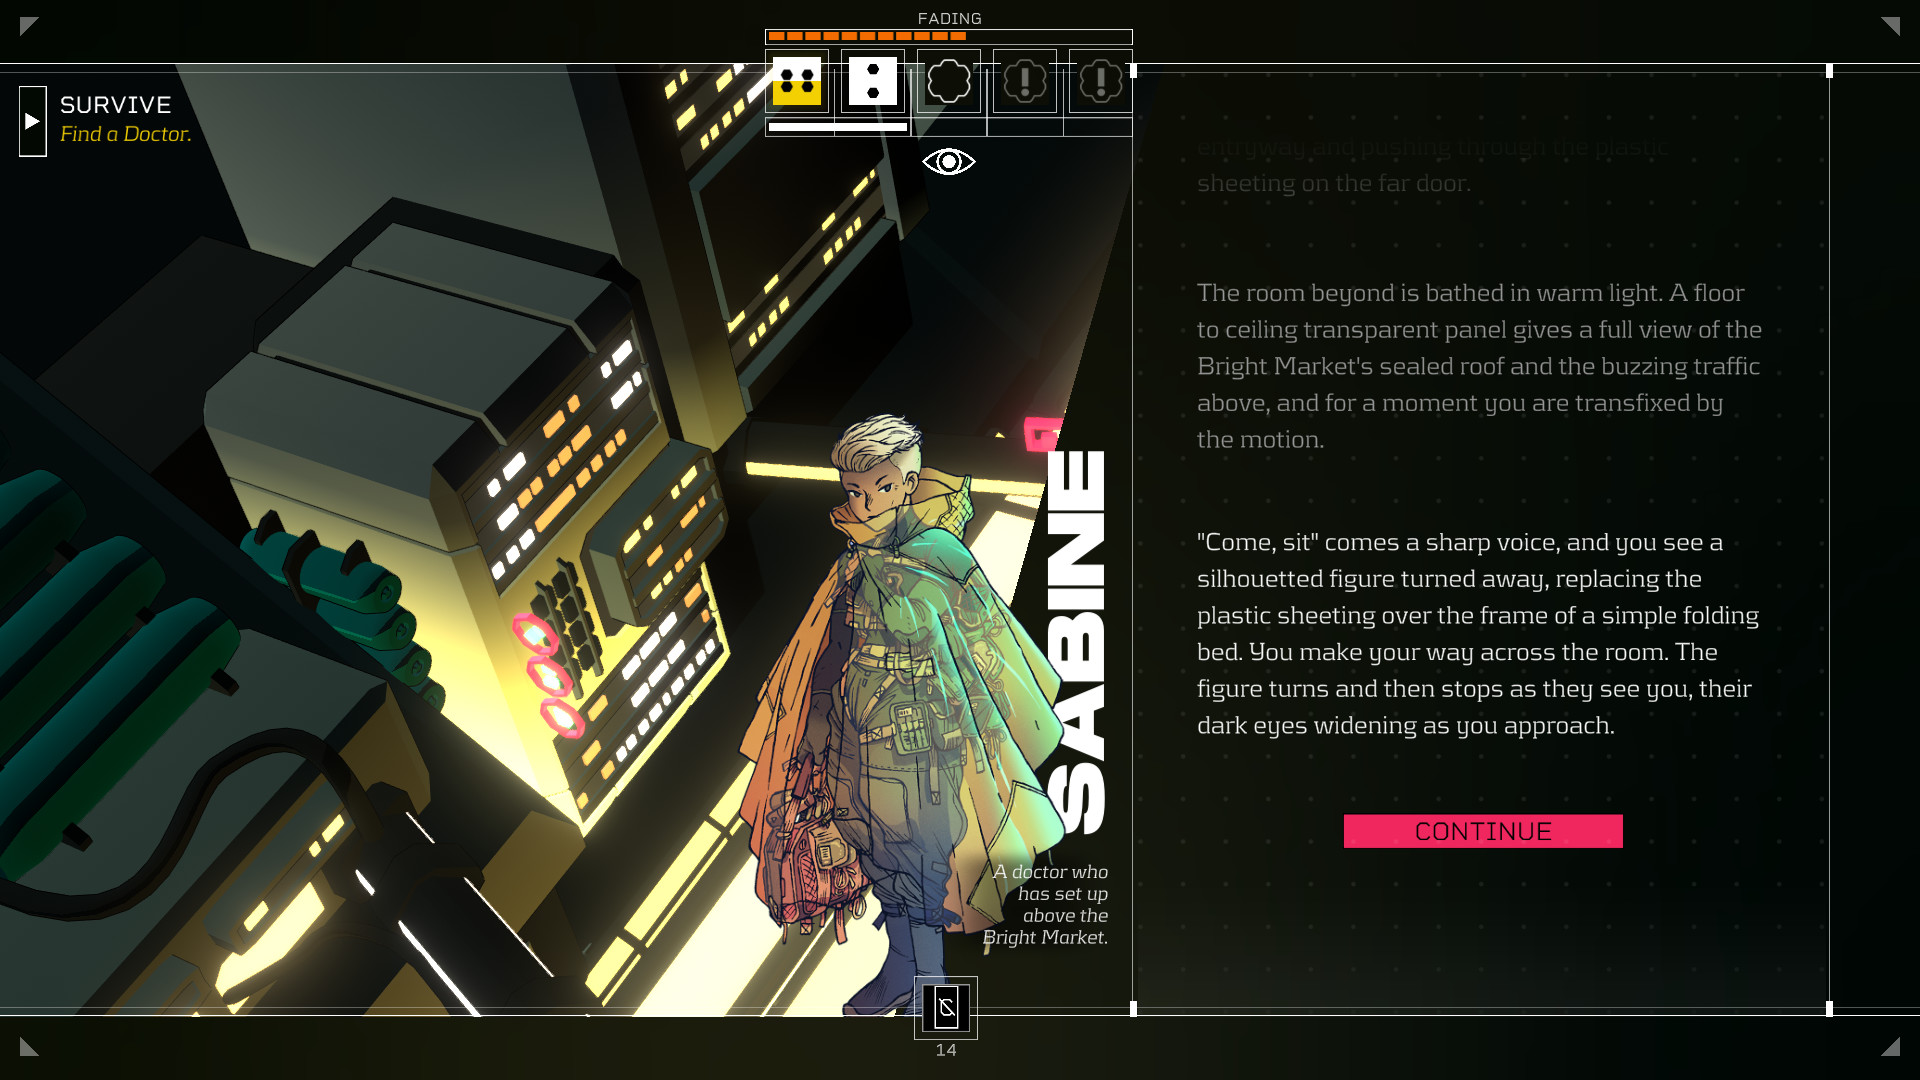 A conversation screen with Sabine from the game Citizen Sleeper